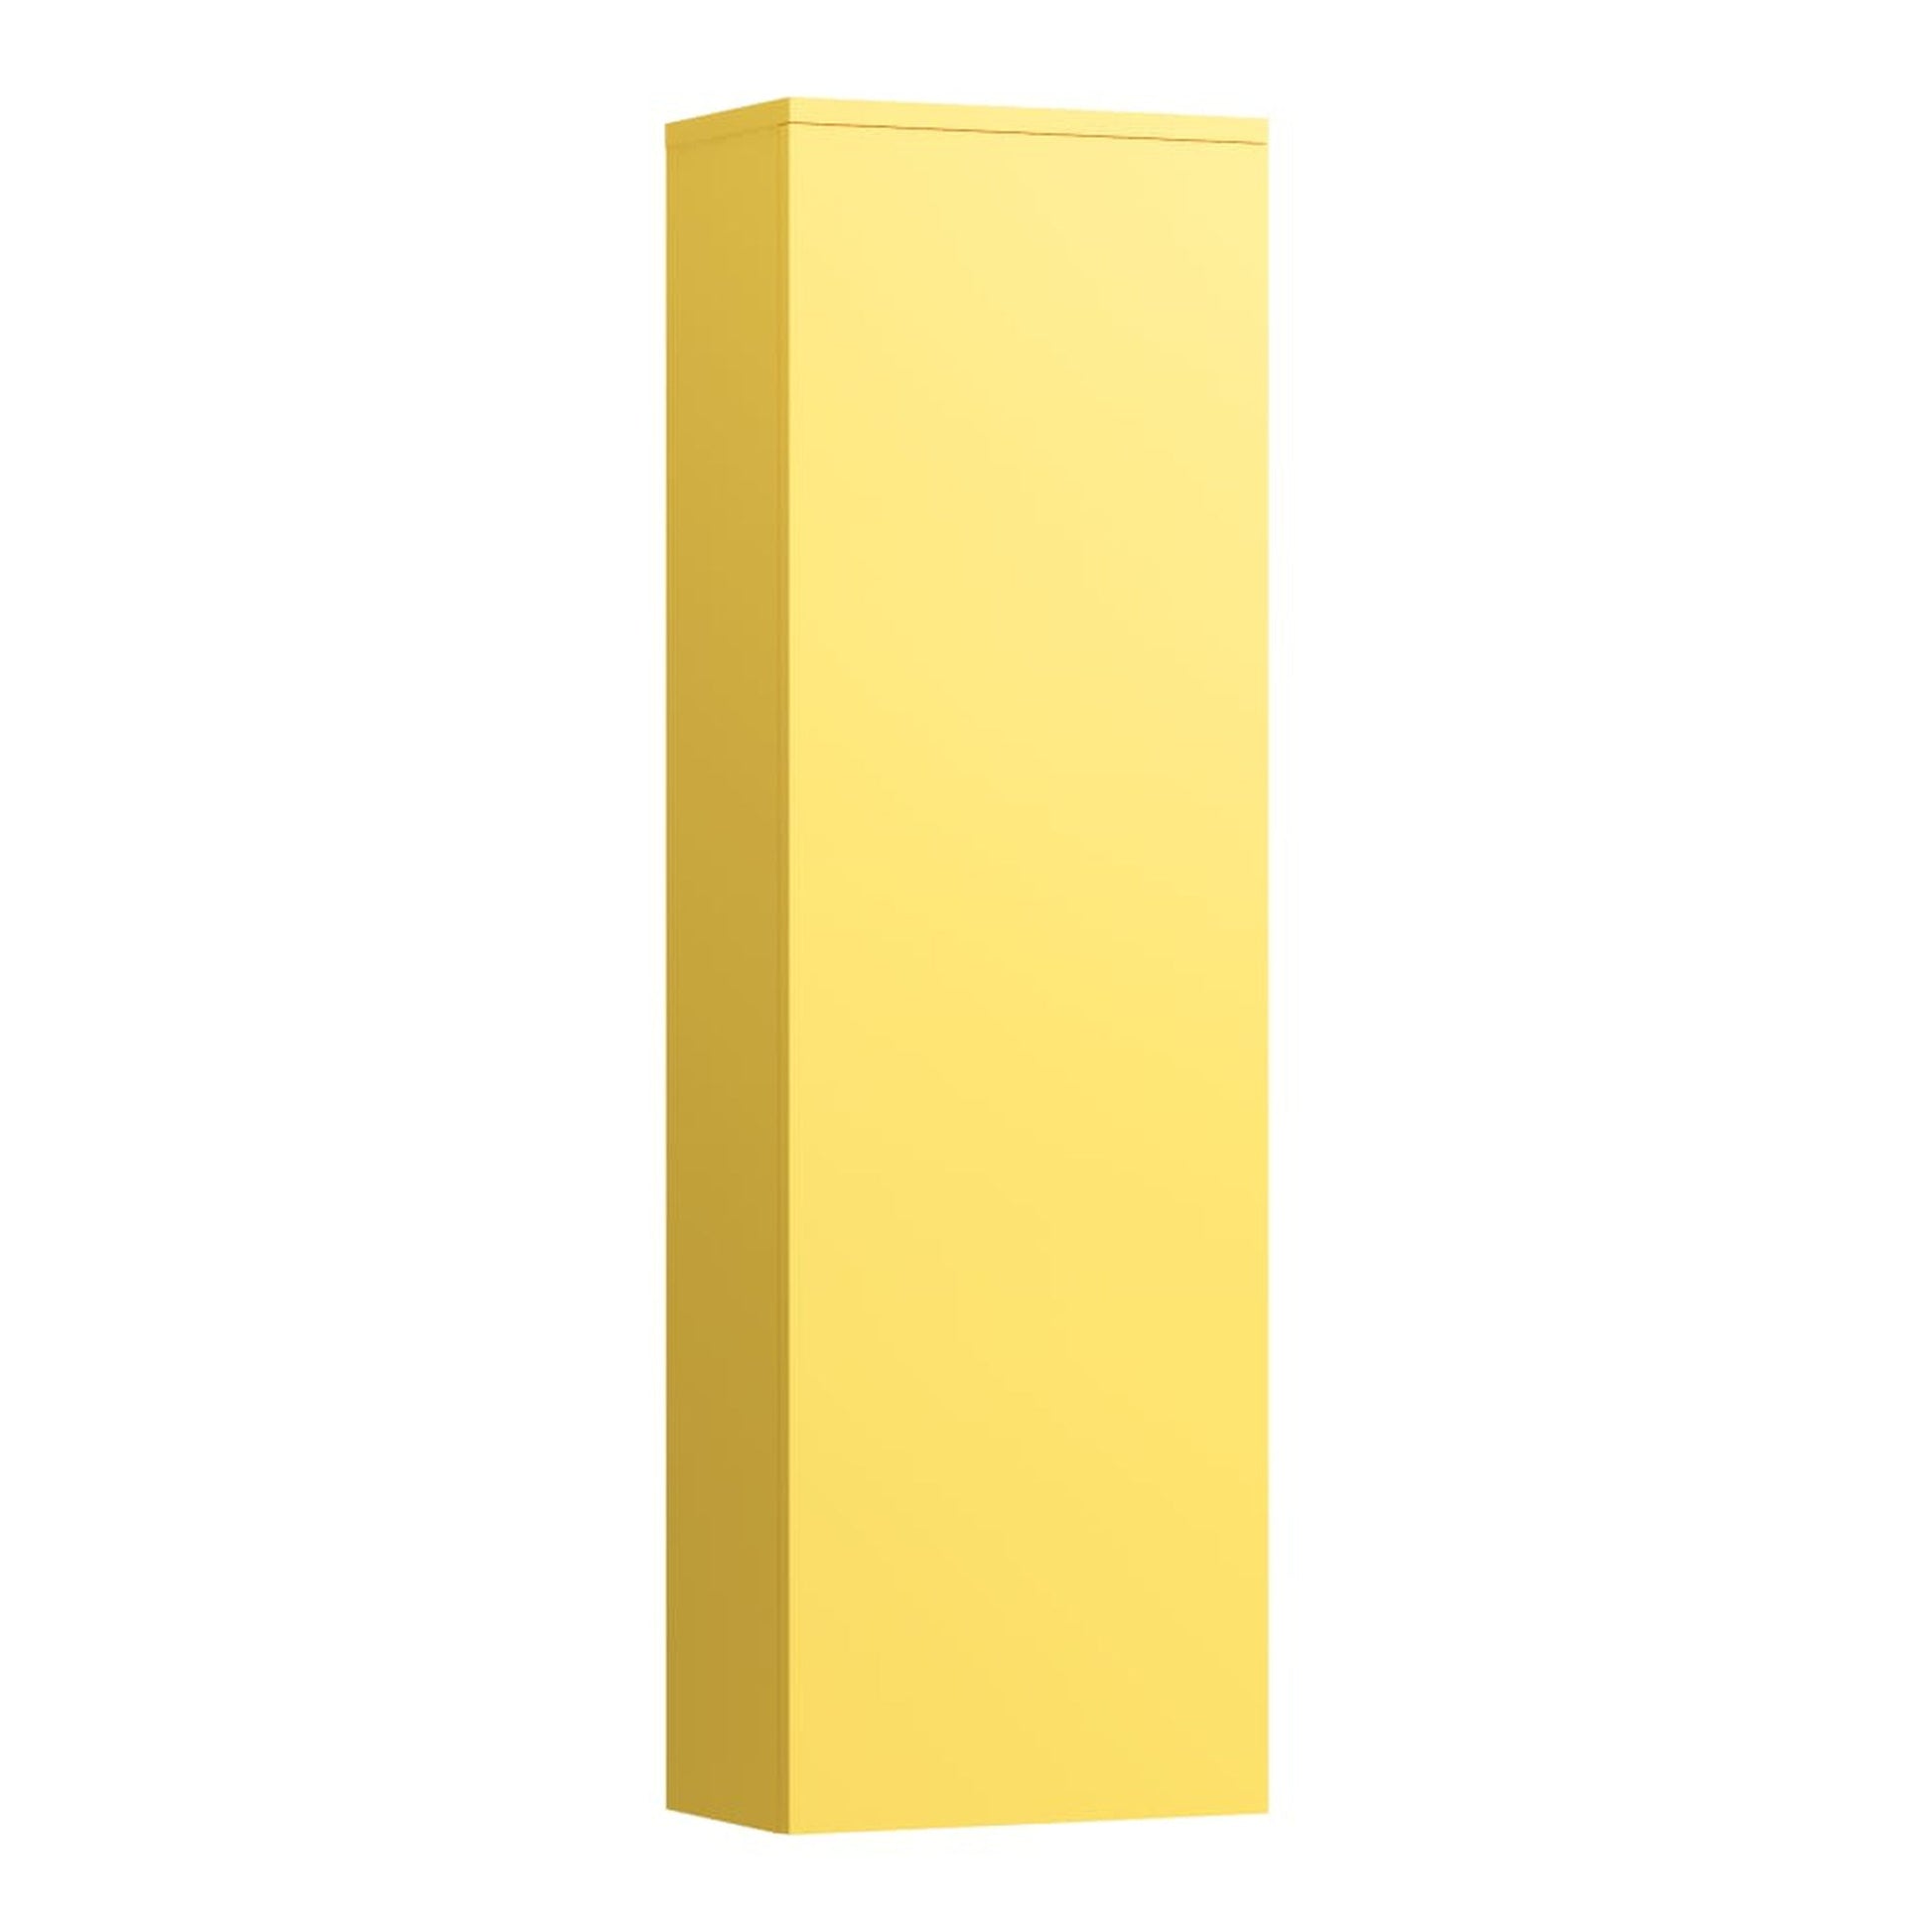 Laufen Kartell 16" x 51" 1-Door Right-Hinged Mustard Yellow Wall-Mounted Tall Cabinet With 4 Fixed Glass Shelves